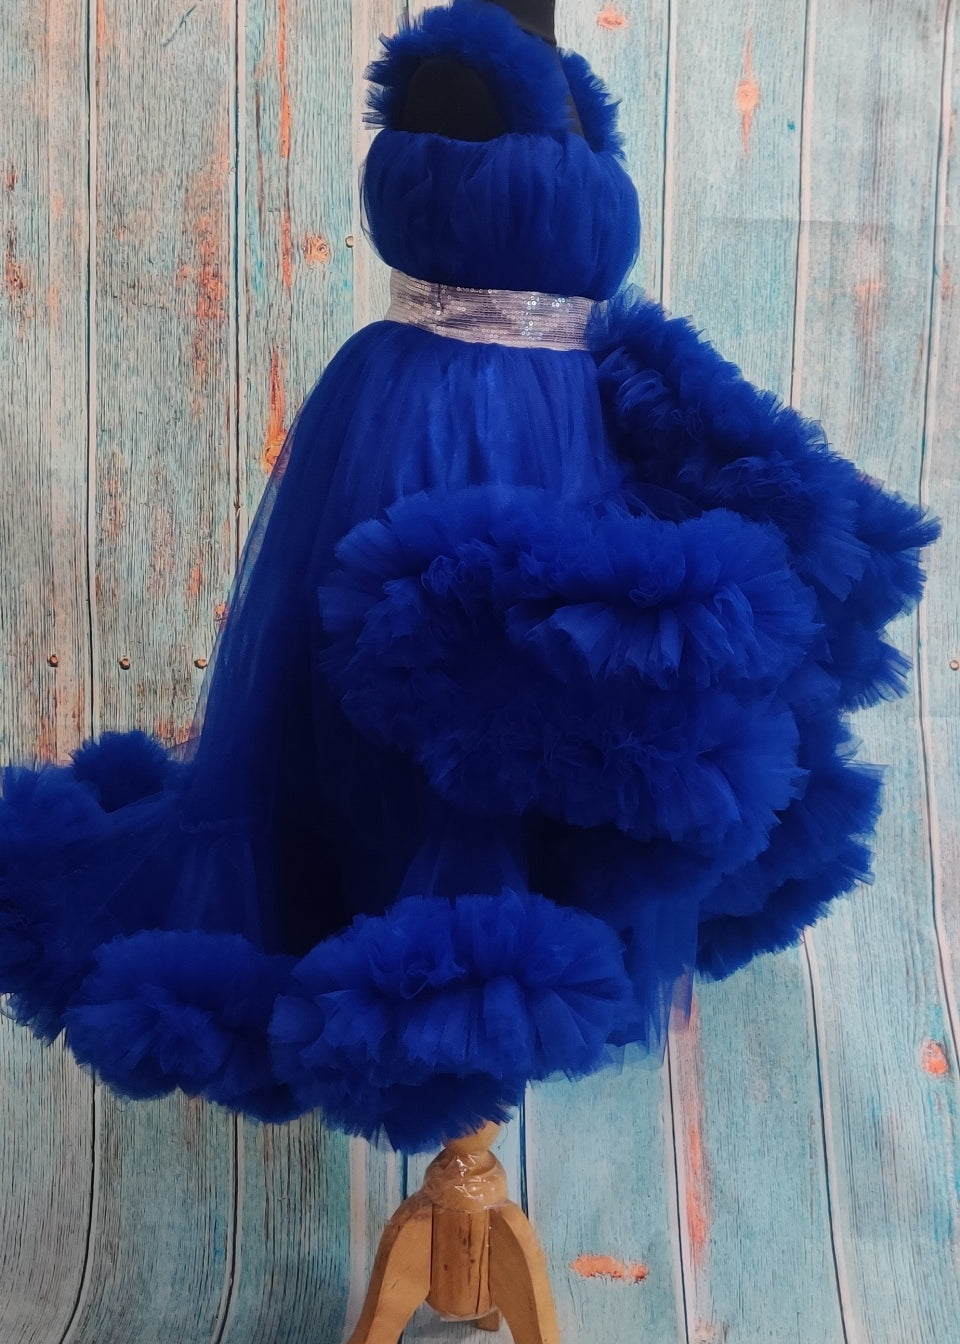 Party gown for kids